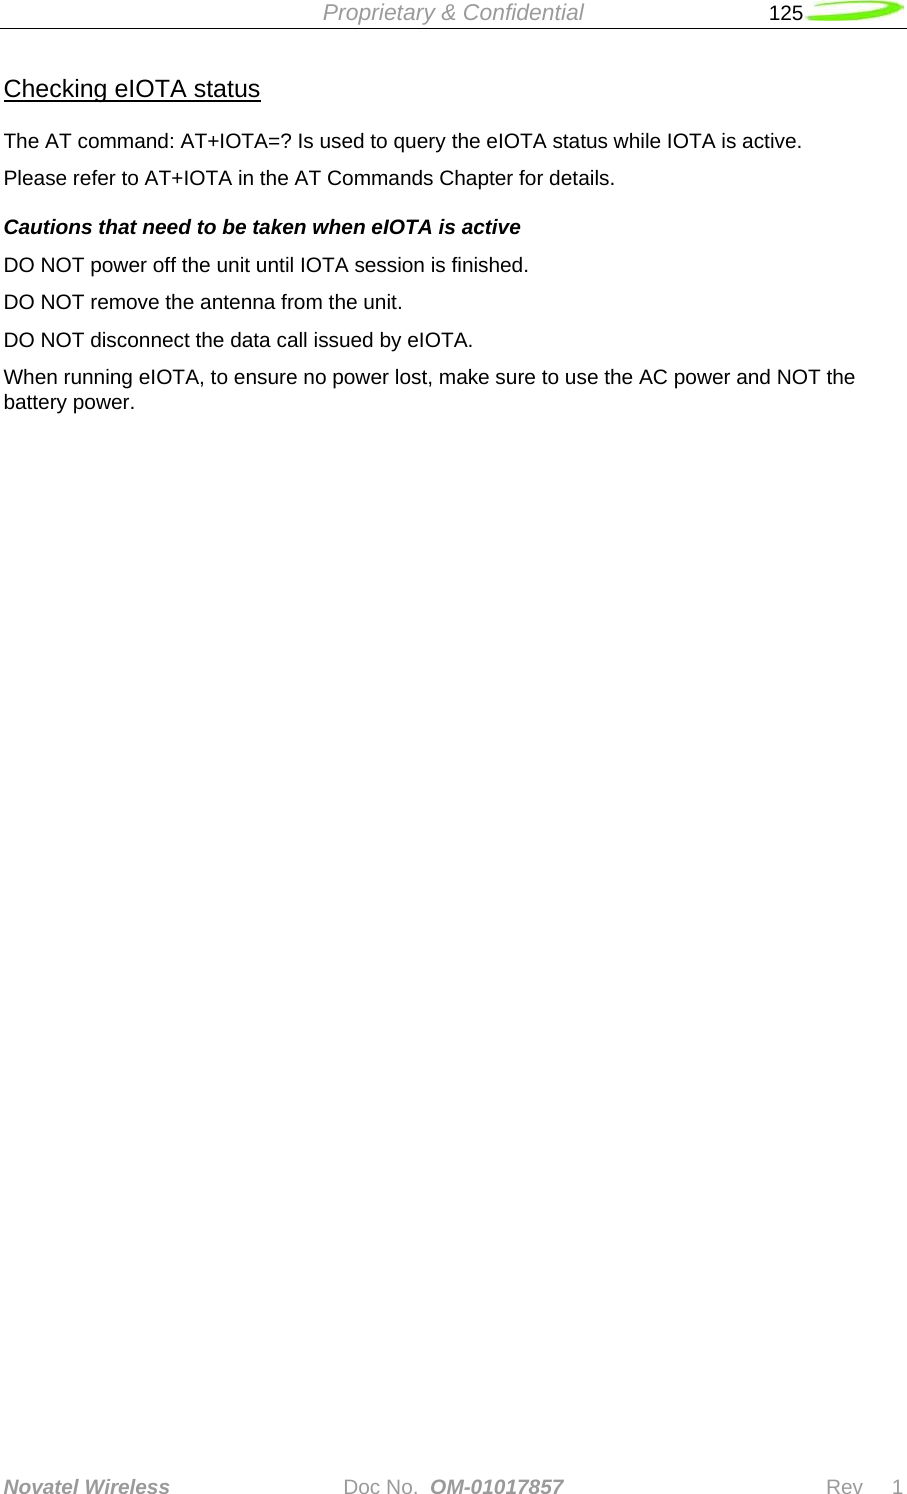  Proprietary &amp; Confidential   125   Novatel Wireless   Doc No.  OM-01017857                              Rev     1  Checking eIOTA status The AT command: AT+IOTA=? Is used to query the eIOTA status while IOTA is active. Please refer to AT+IOTA in the AT Commands Chapter for details. Cautions that need to be taken when eIOTA is active DO NOT power off the unit until IOTA session is finished. DO NOT remove the antenna from the unit. DO NOT disconnect the data call issued by eIOTA. When running eIOTA, to ensure no power lost, make sure to use the AC power and NOT the battery power.     